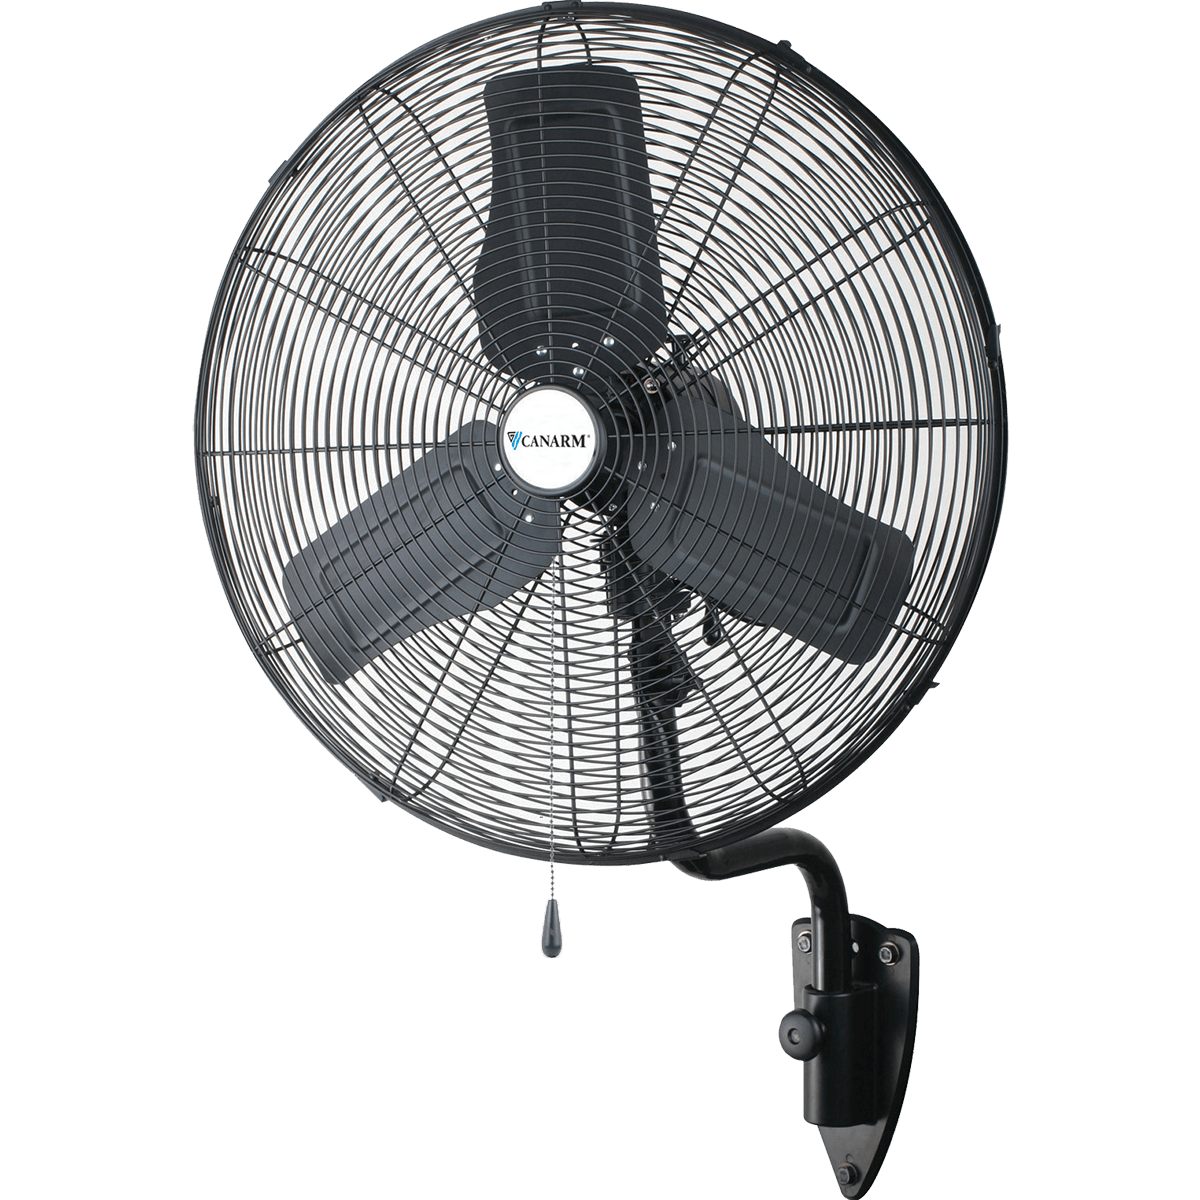 Canarm 3 Speed Oscillating Wall Mount Commercial Fan 24 Inch